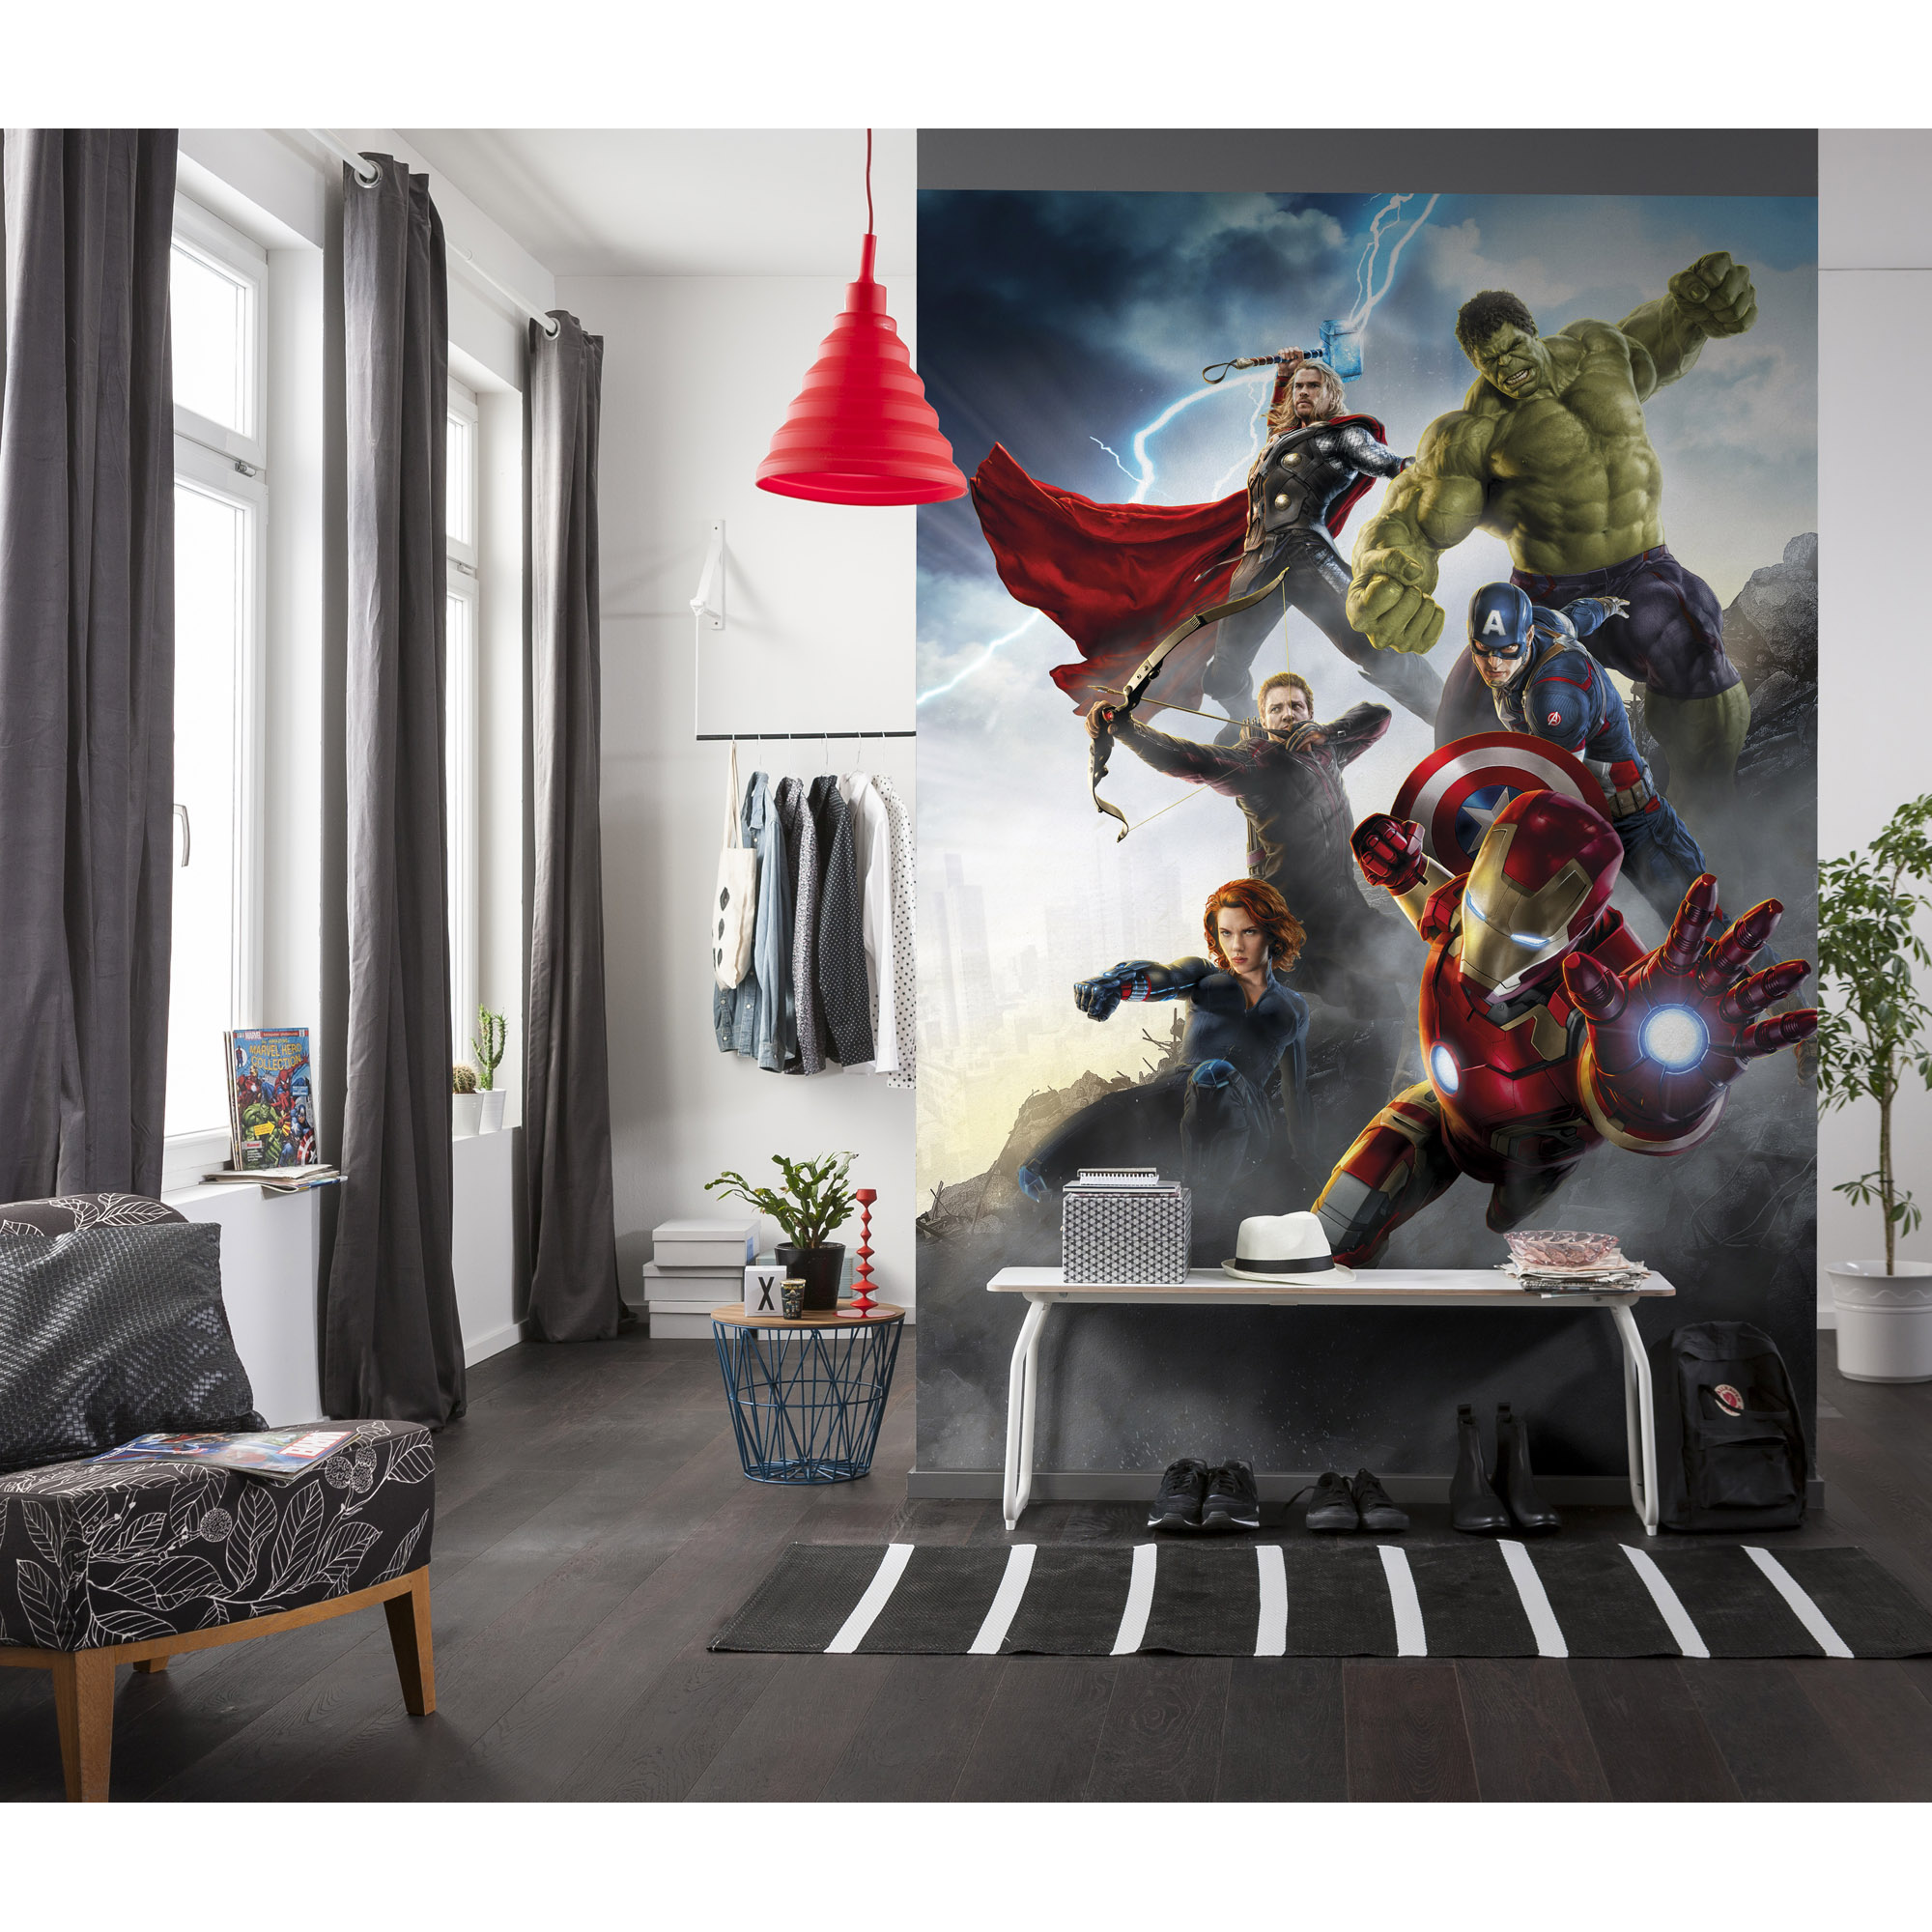 Fototapete 'Avengers Age of Ultron' 184 x 254 cm + product picture